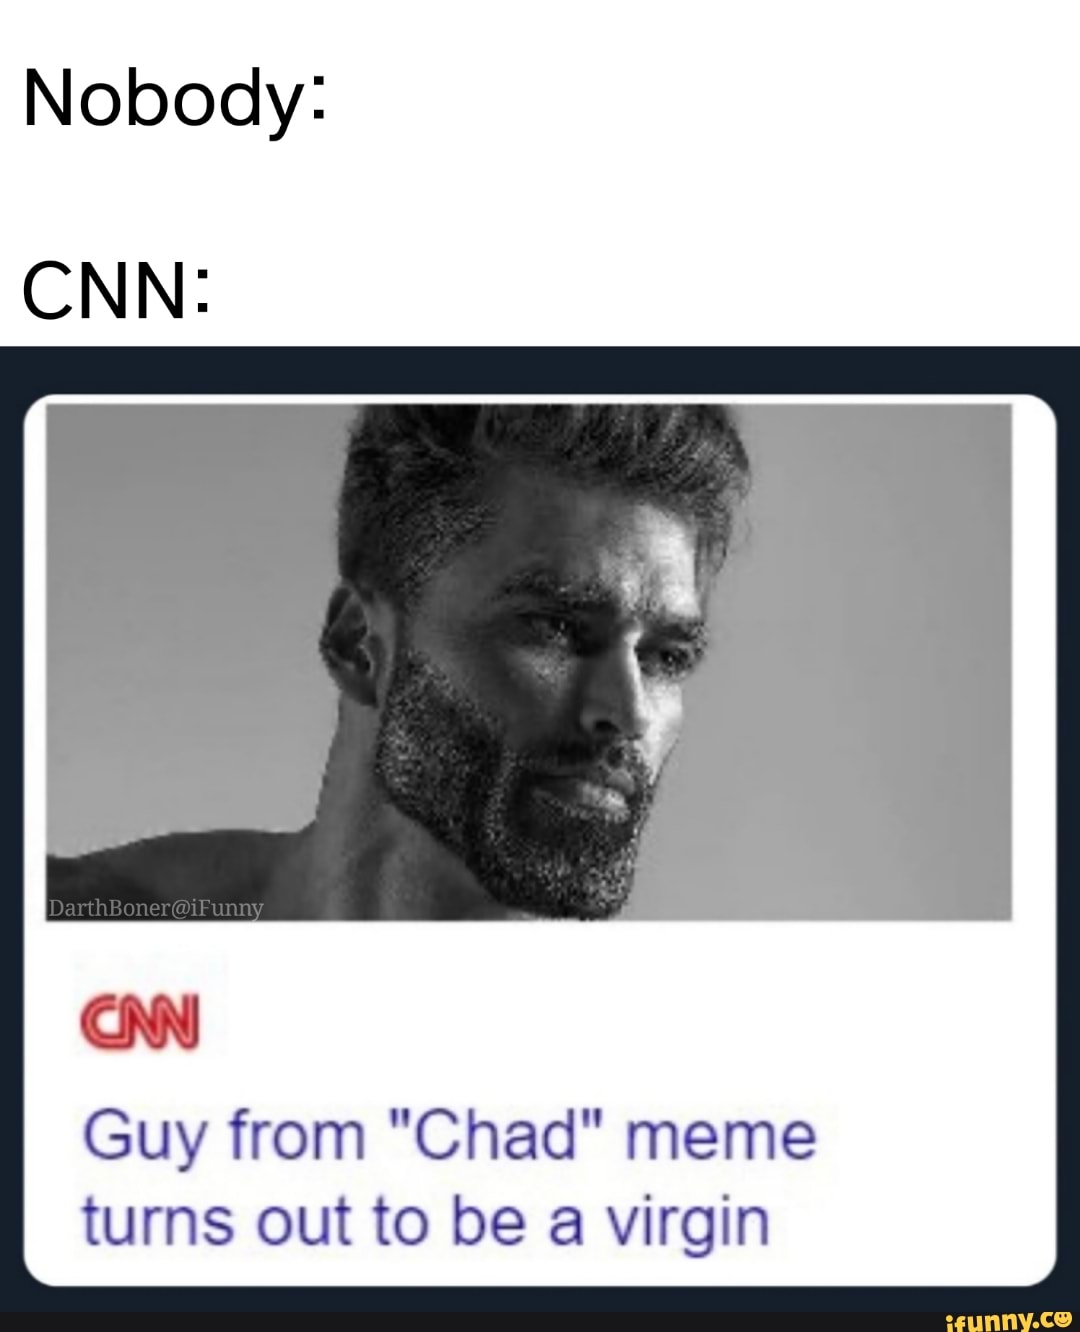 CNN Guy from Chad meme turns out to be a virgin NoulkKnow, I'm